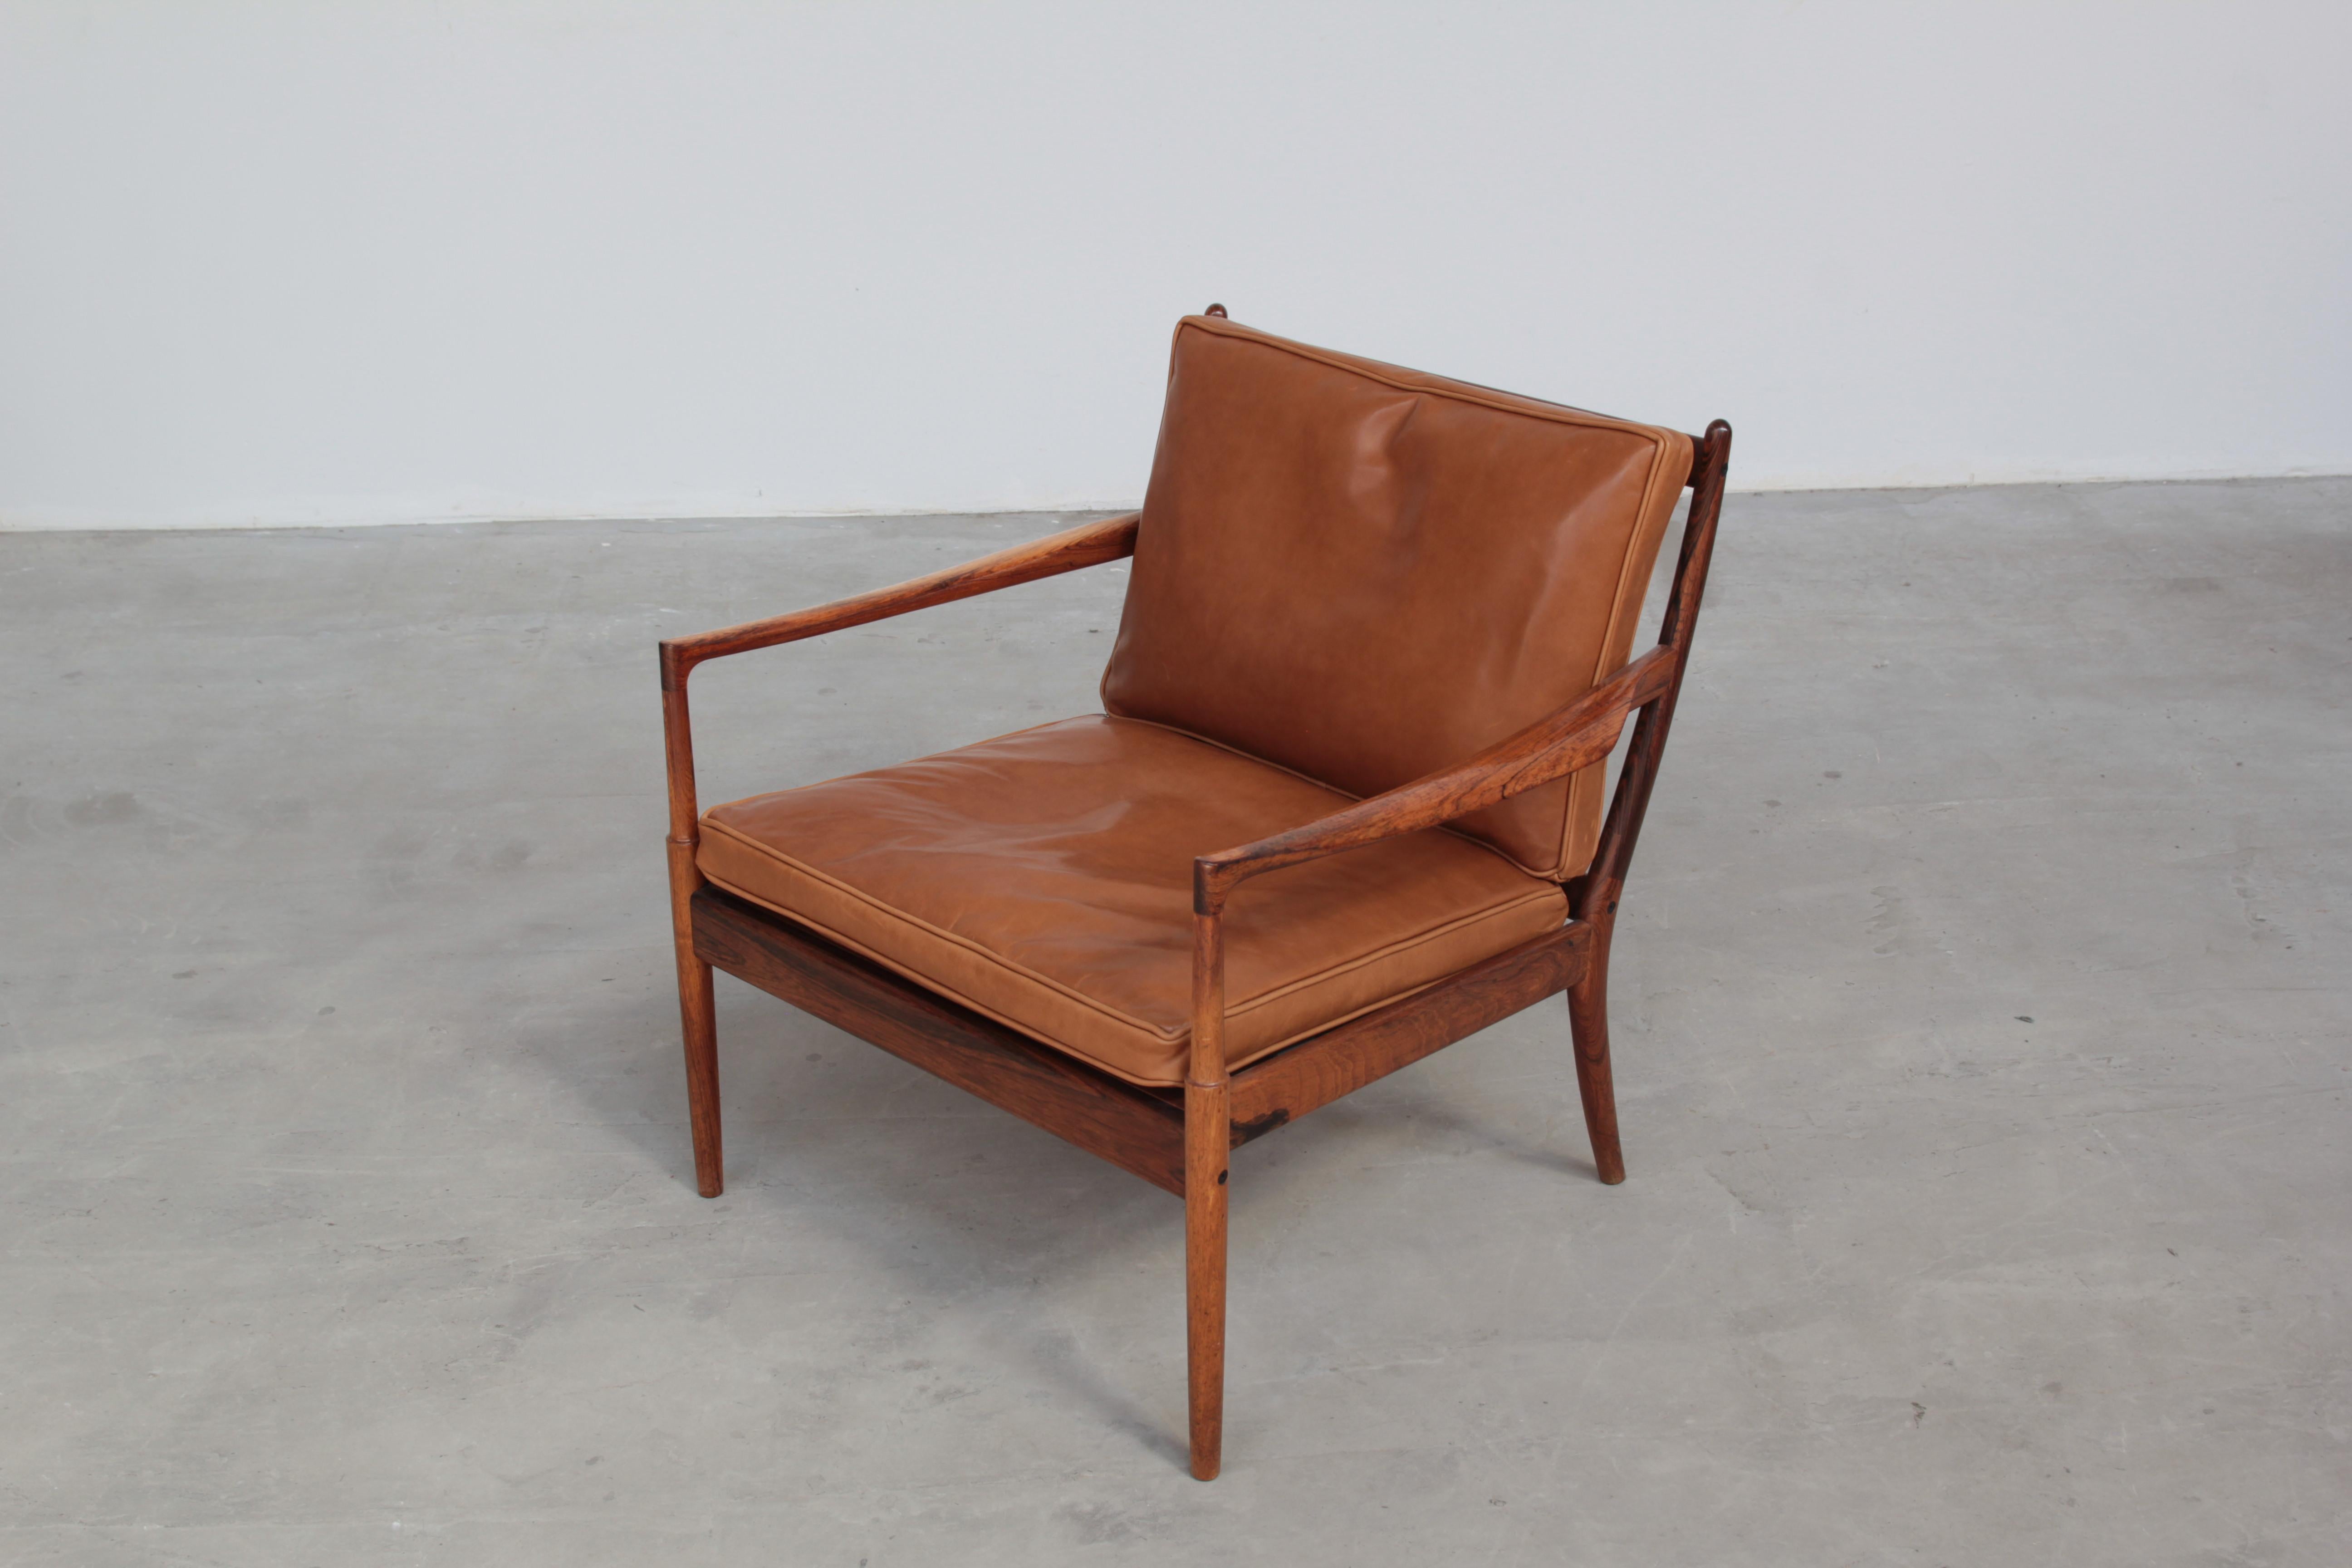 Leather Beautiful Lounge Chair Mod. Samsö by Ib Kofod Larsen for OPE, Sweden, 1960 For Sale